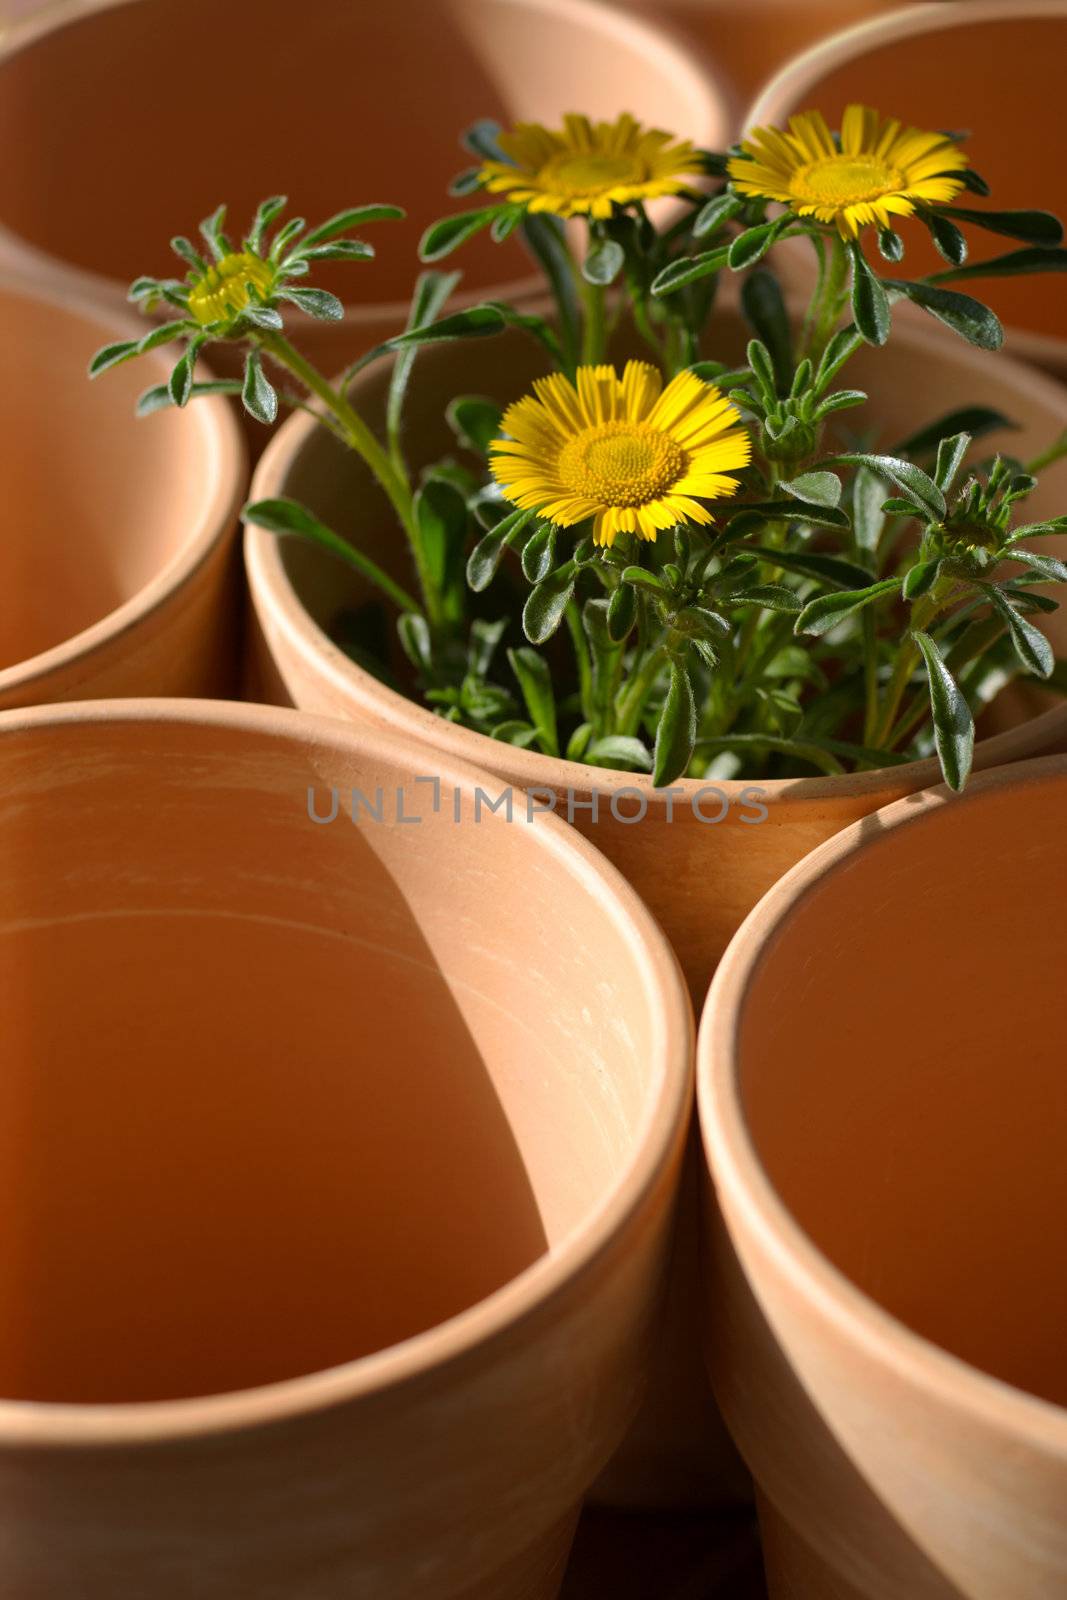 Clay plant pots at the start of spring waiting to be filled with soil and flowers.
